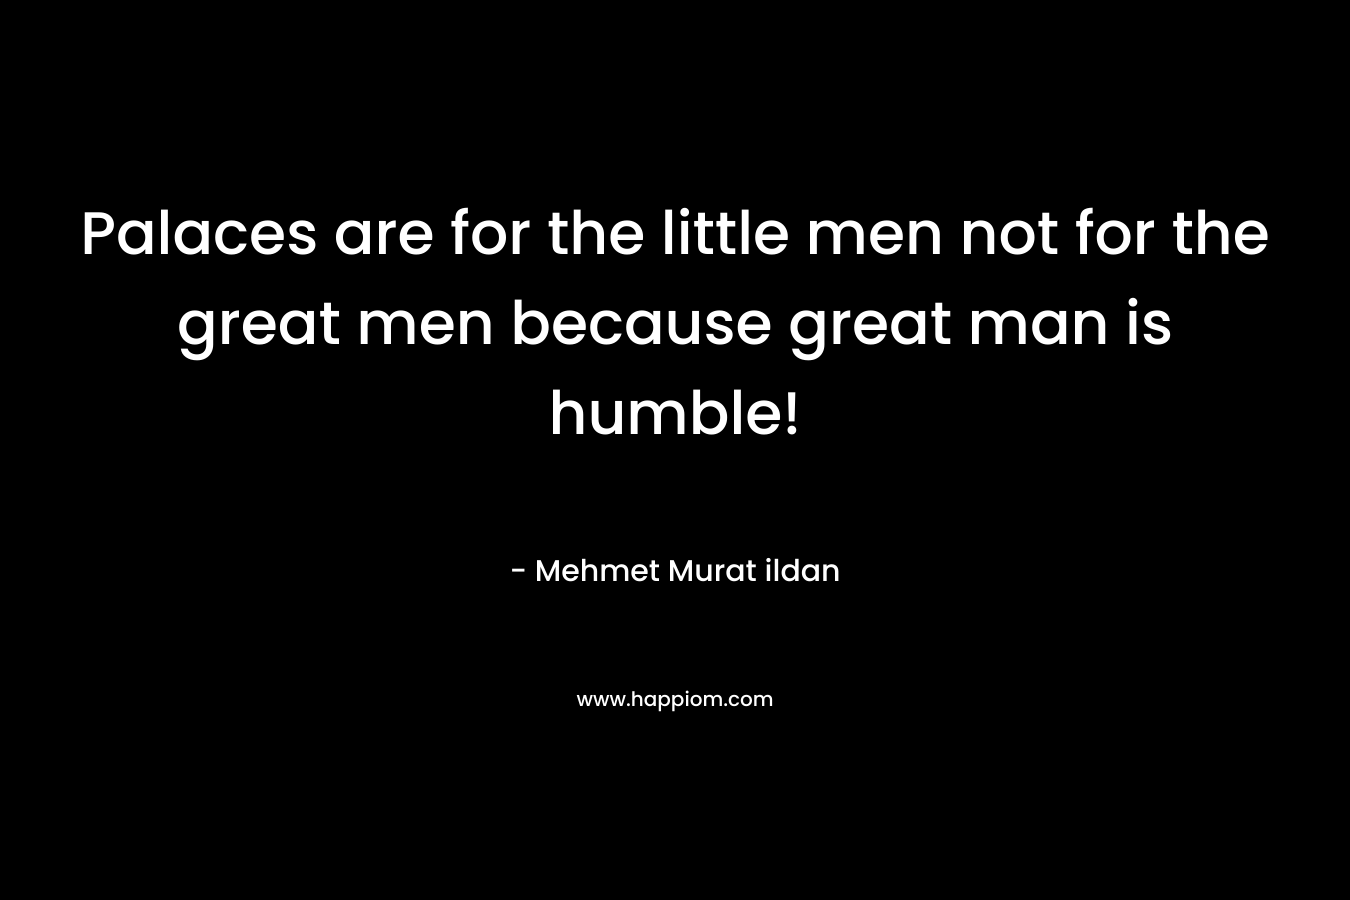 Palaces are for the little men not for the great men because great man is humble! – Mehmet Murat ildan